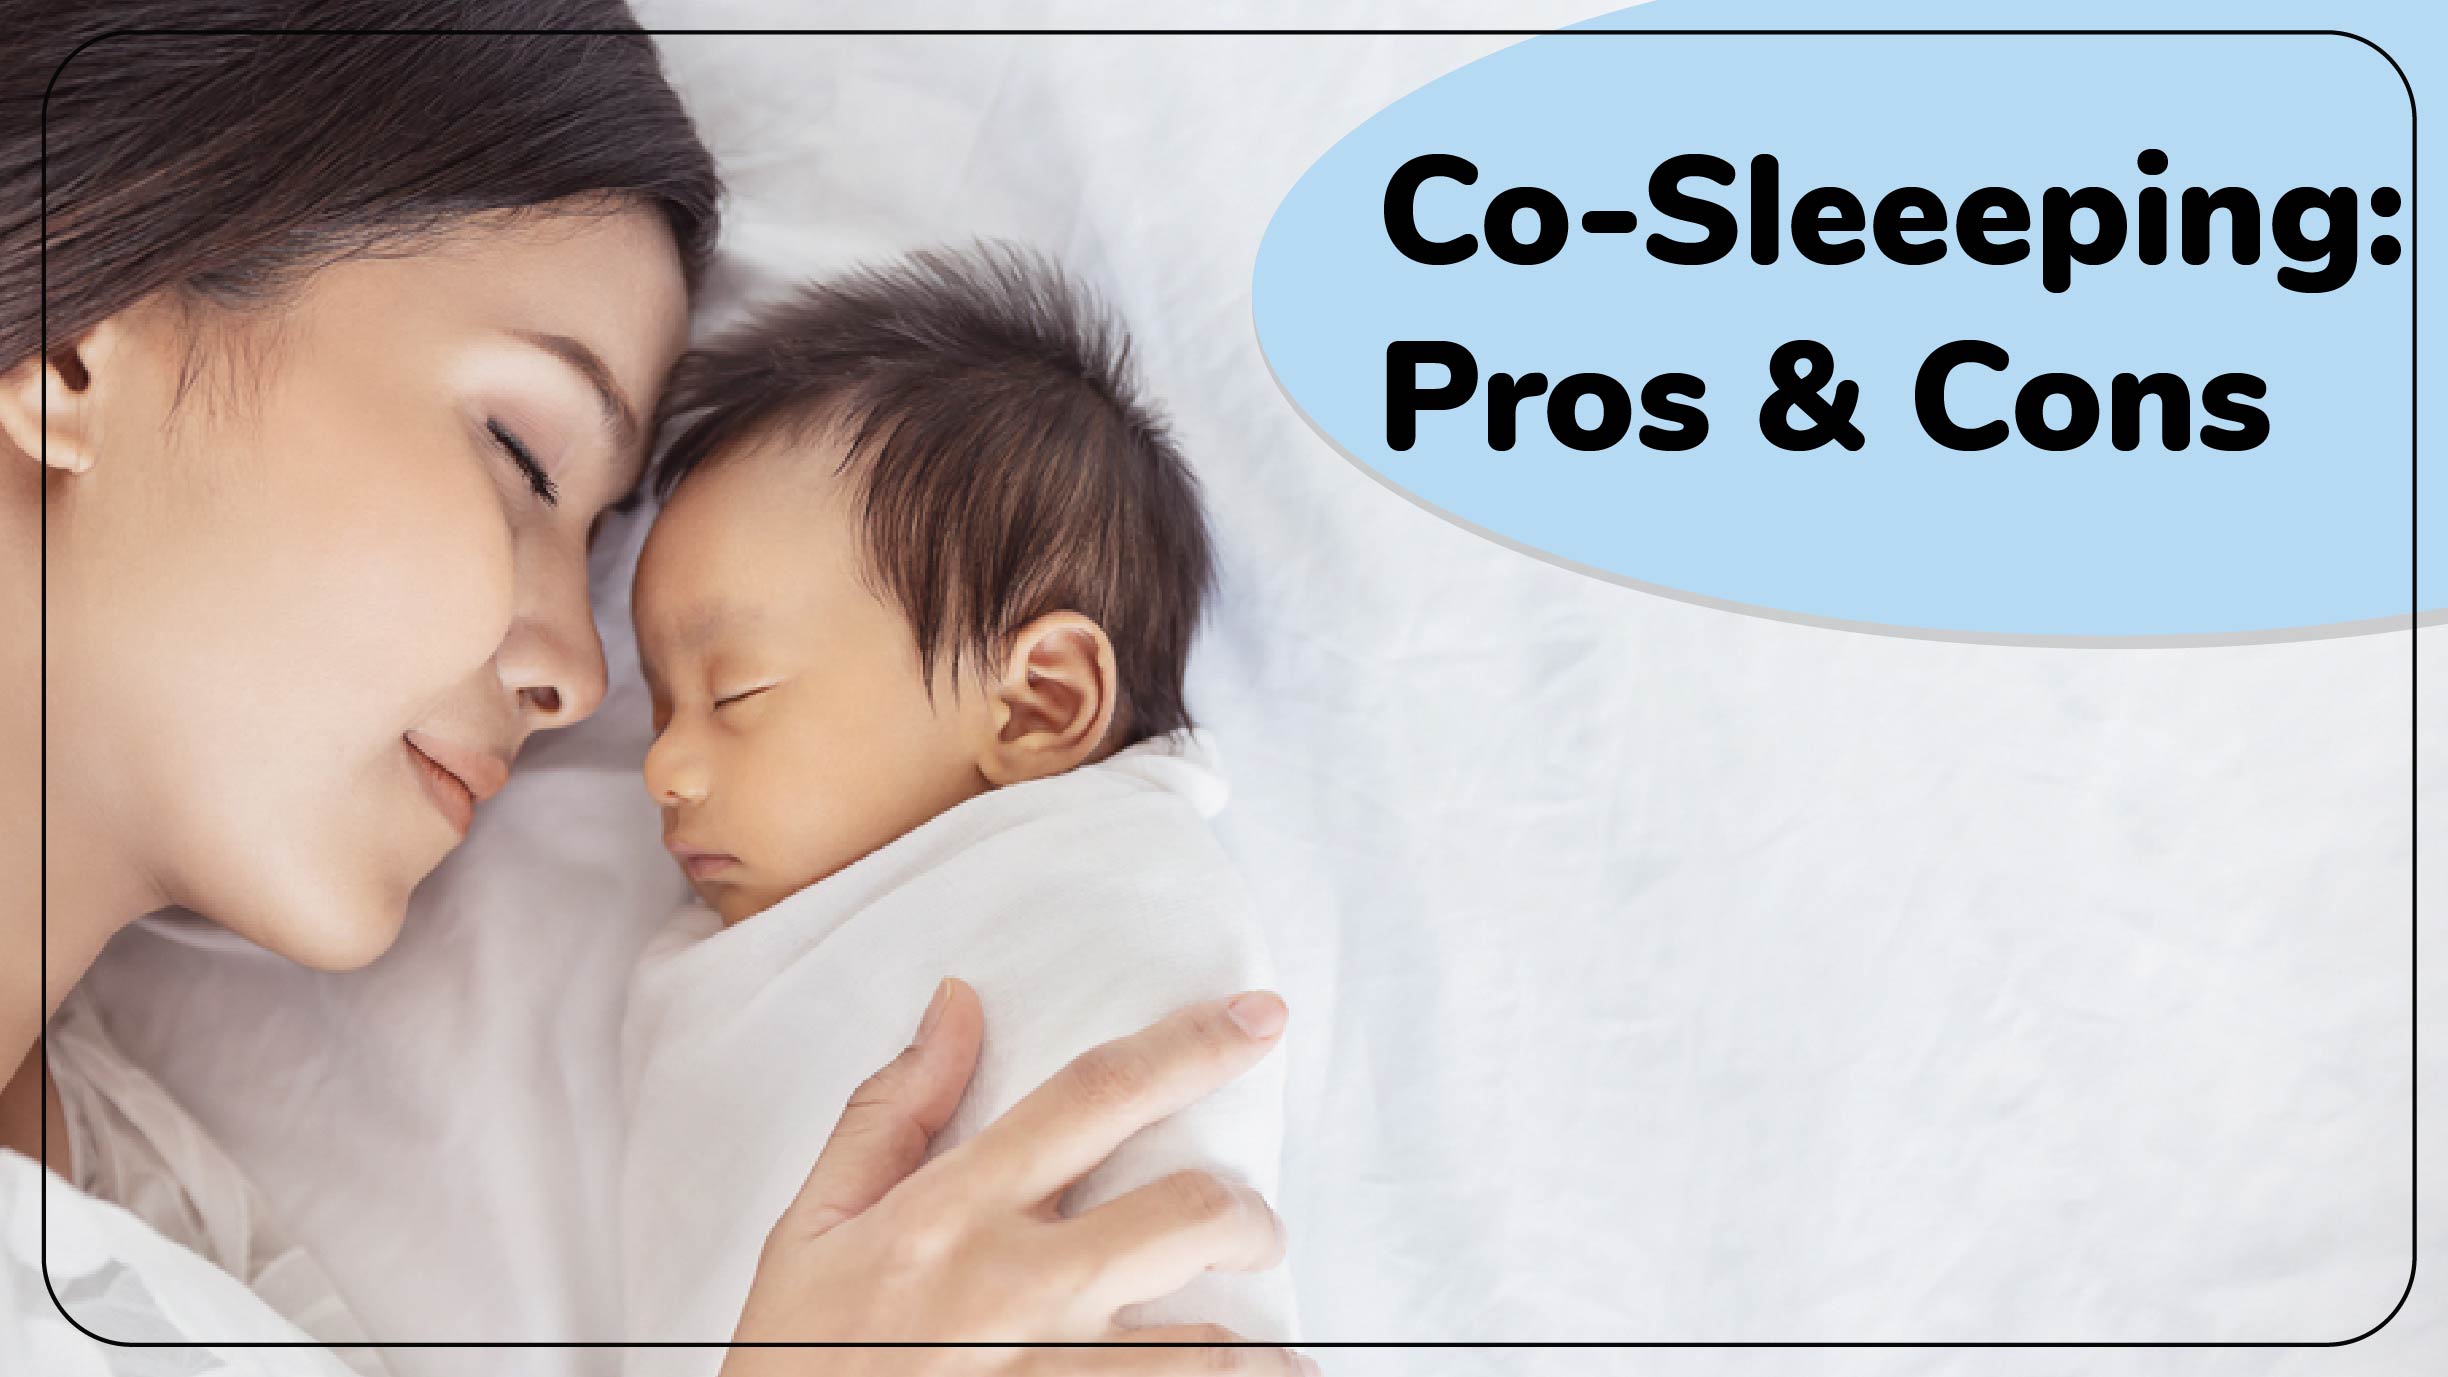 Co-sleeping: pros and cons